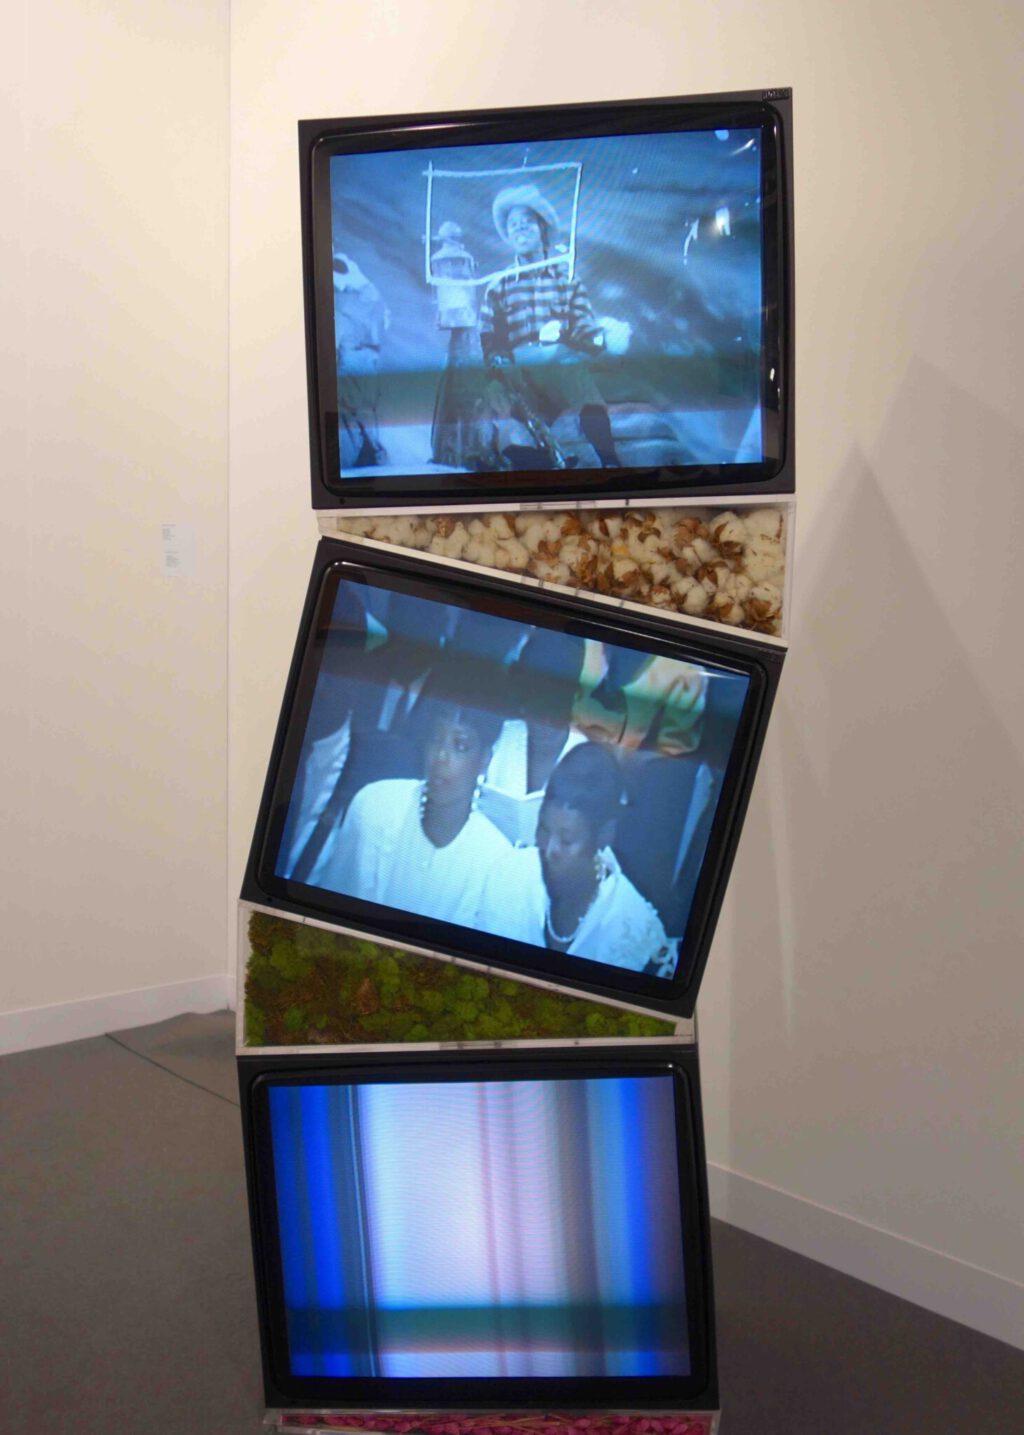 Ja’Tovia Gary Precious Memories (Tower) 2020 SD video and SD video from 16mm film on 3 CRT monitors, acrylic, dried cotton, moss, dried helichrysum ed.2:2. 65.000 US$. @ galerie frank elbaz